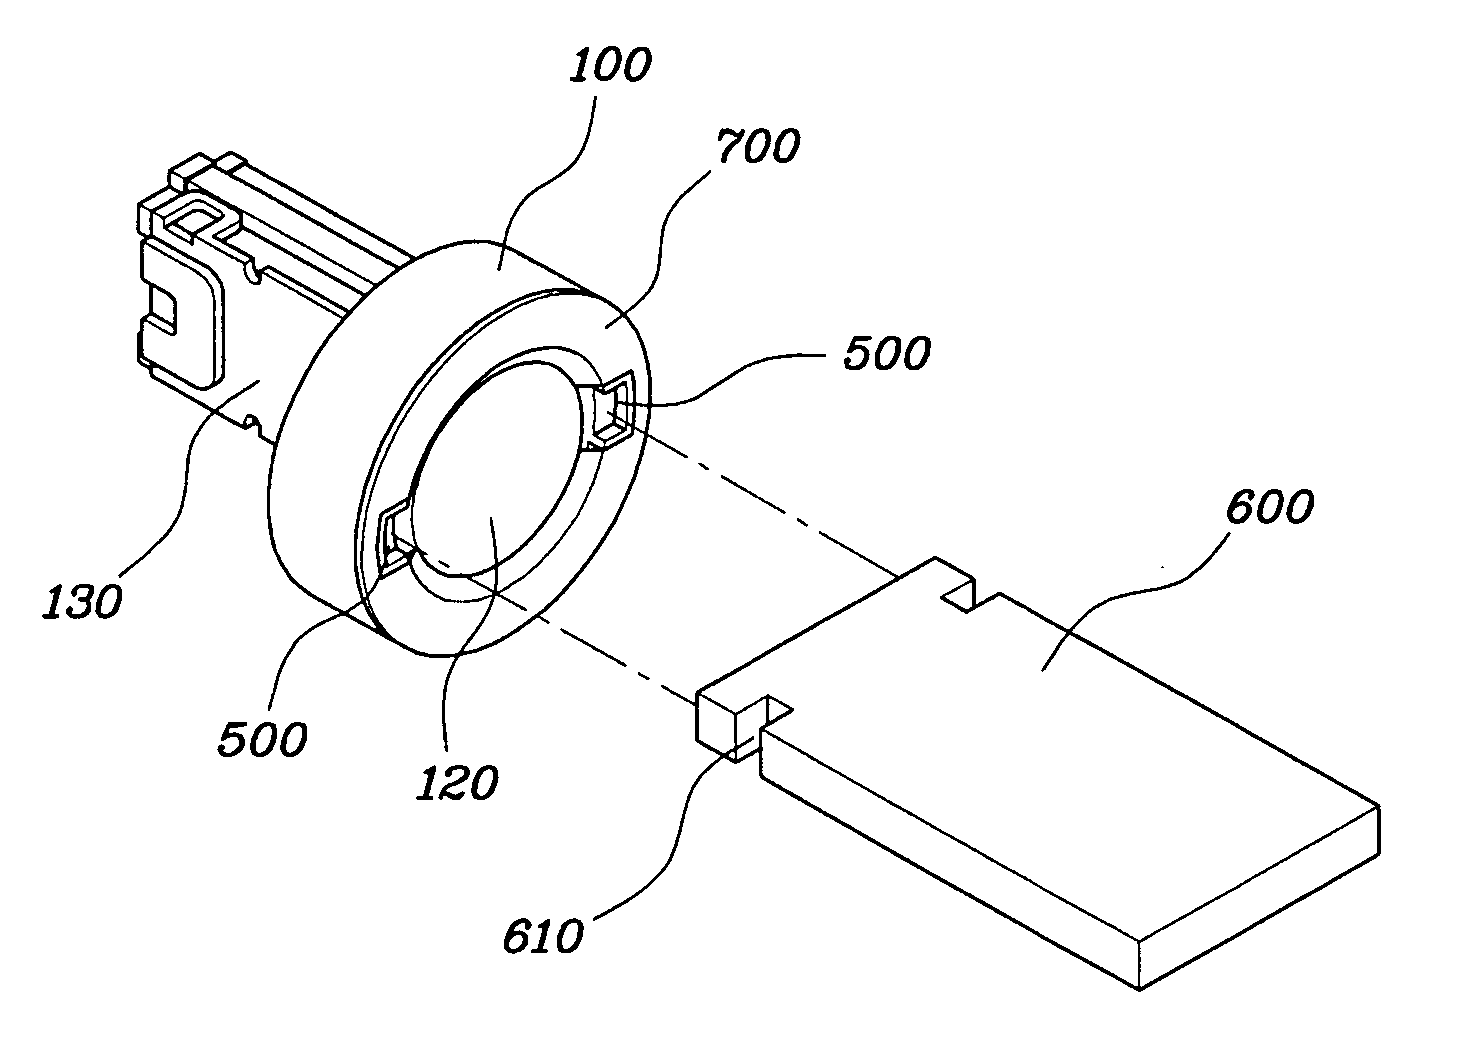 Starting button apparatus for vehicle